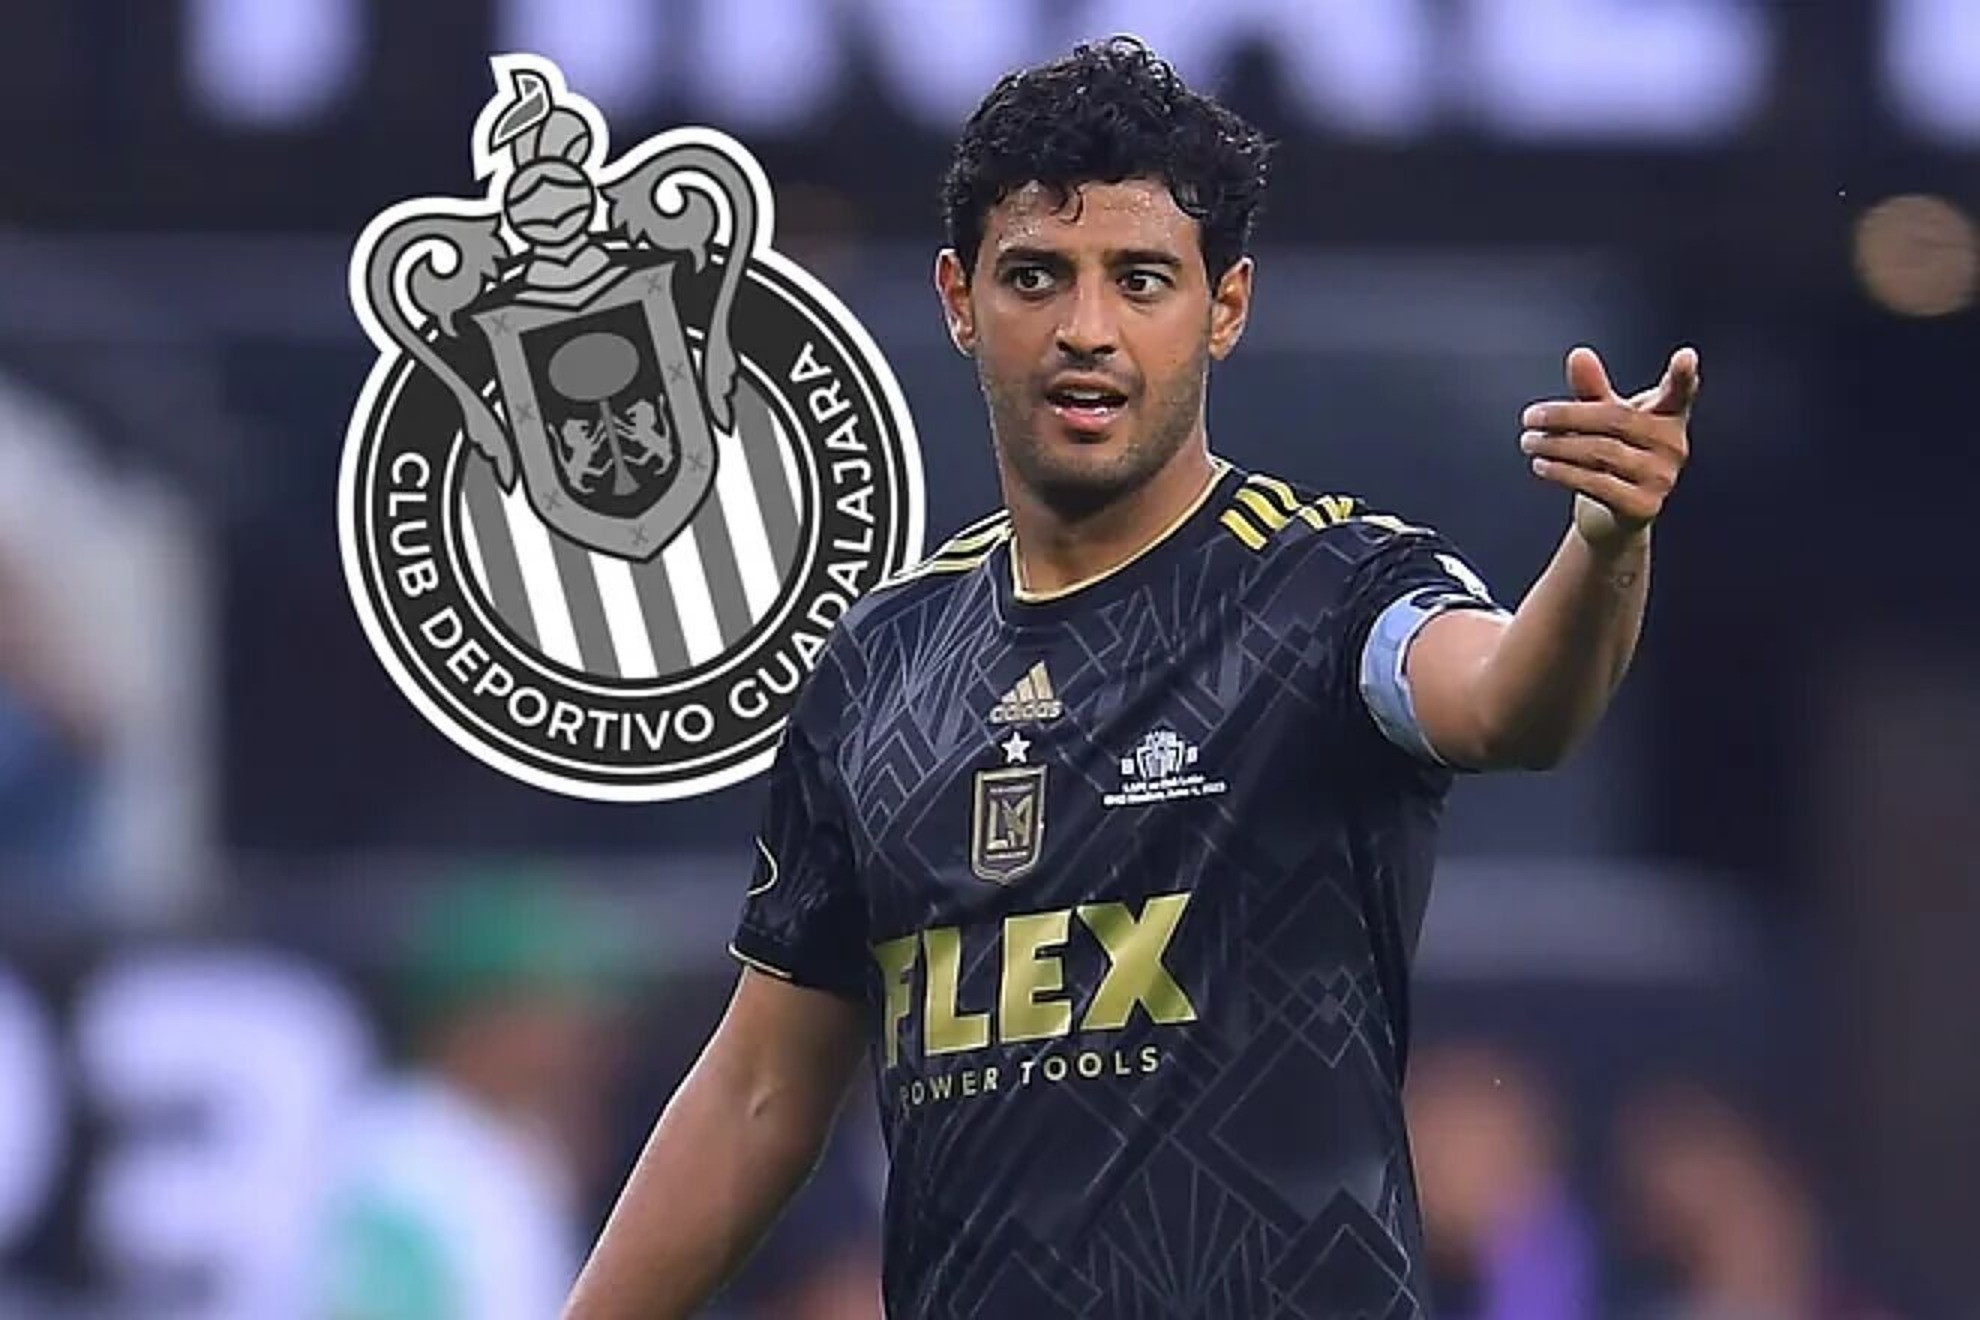 Vela, in a montage of his photo with the Chivas crest